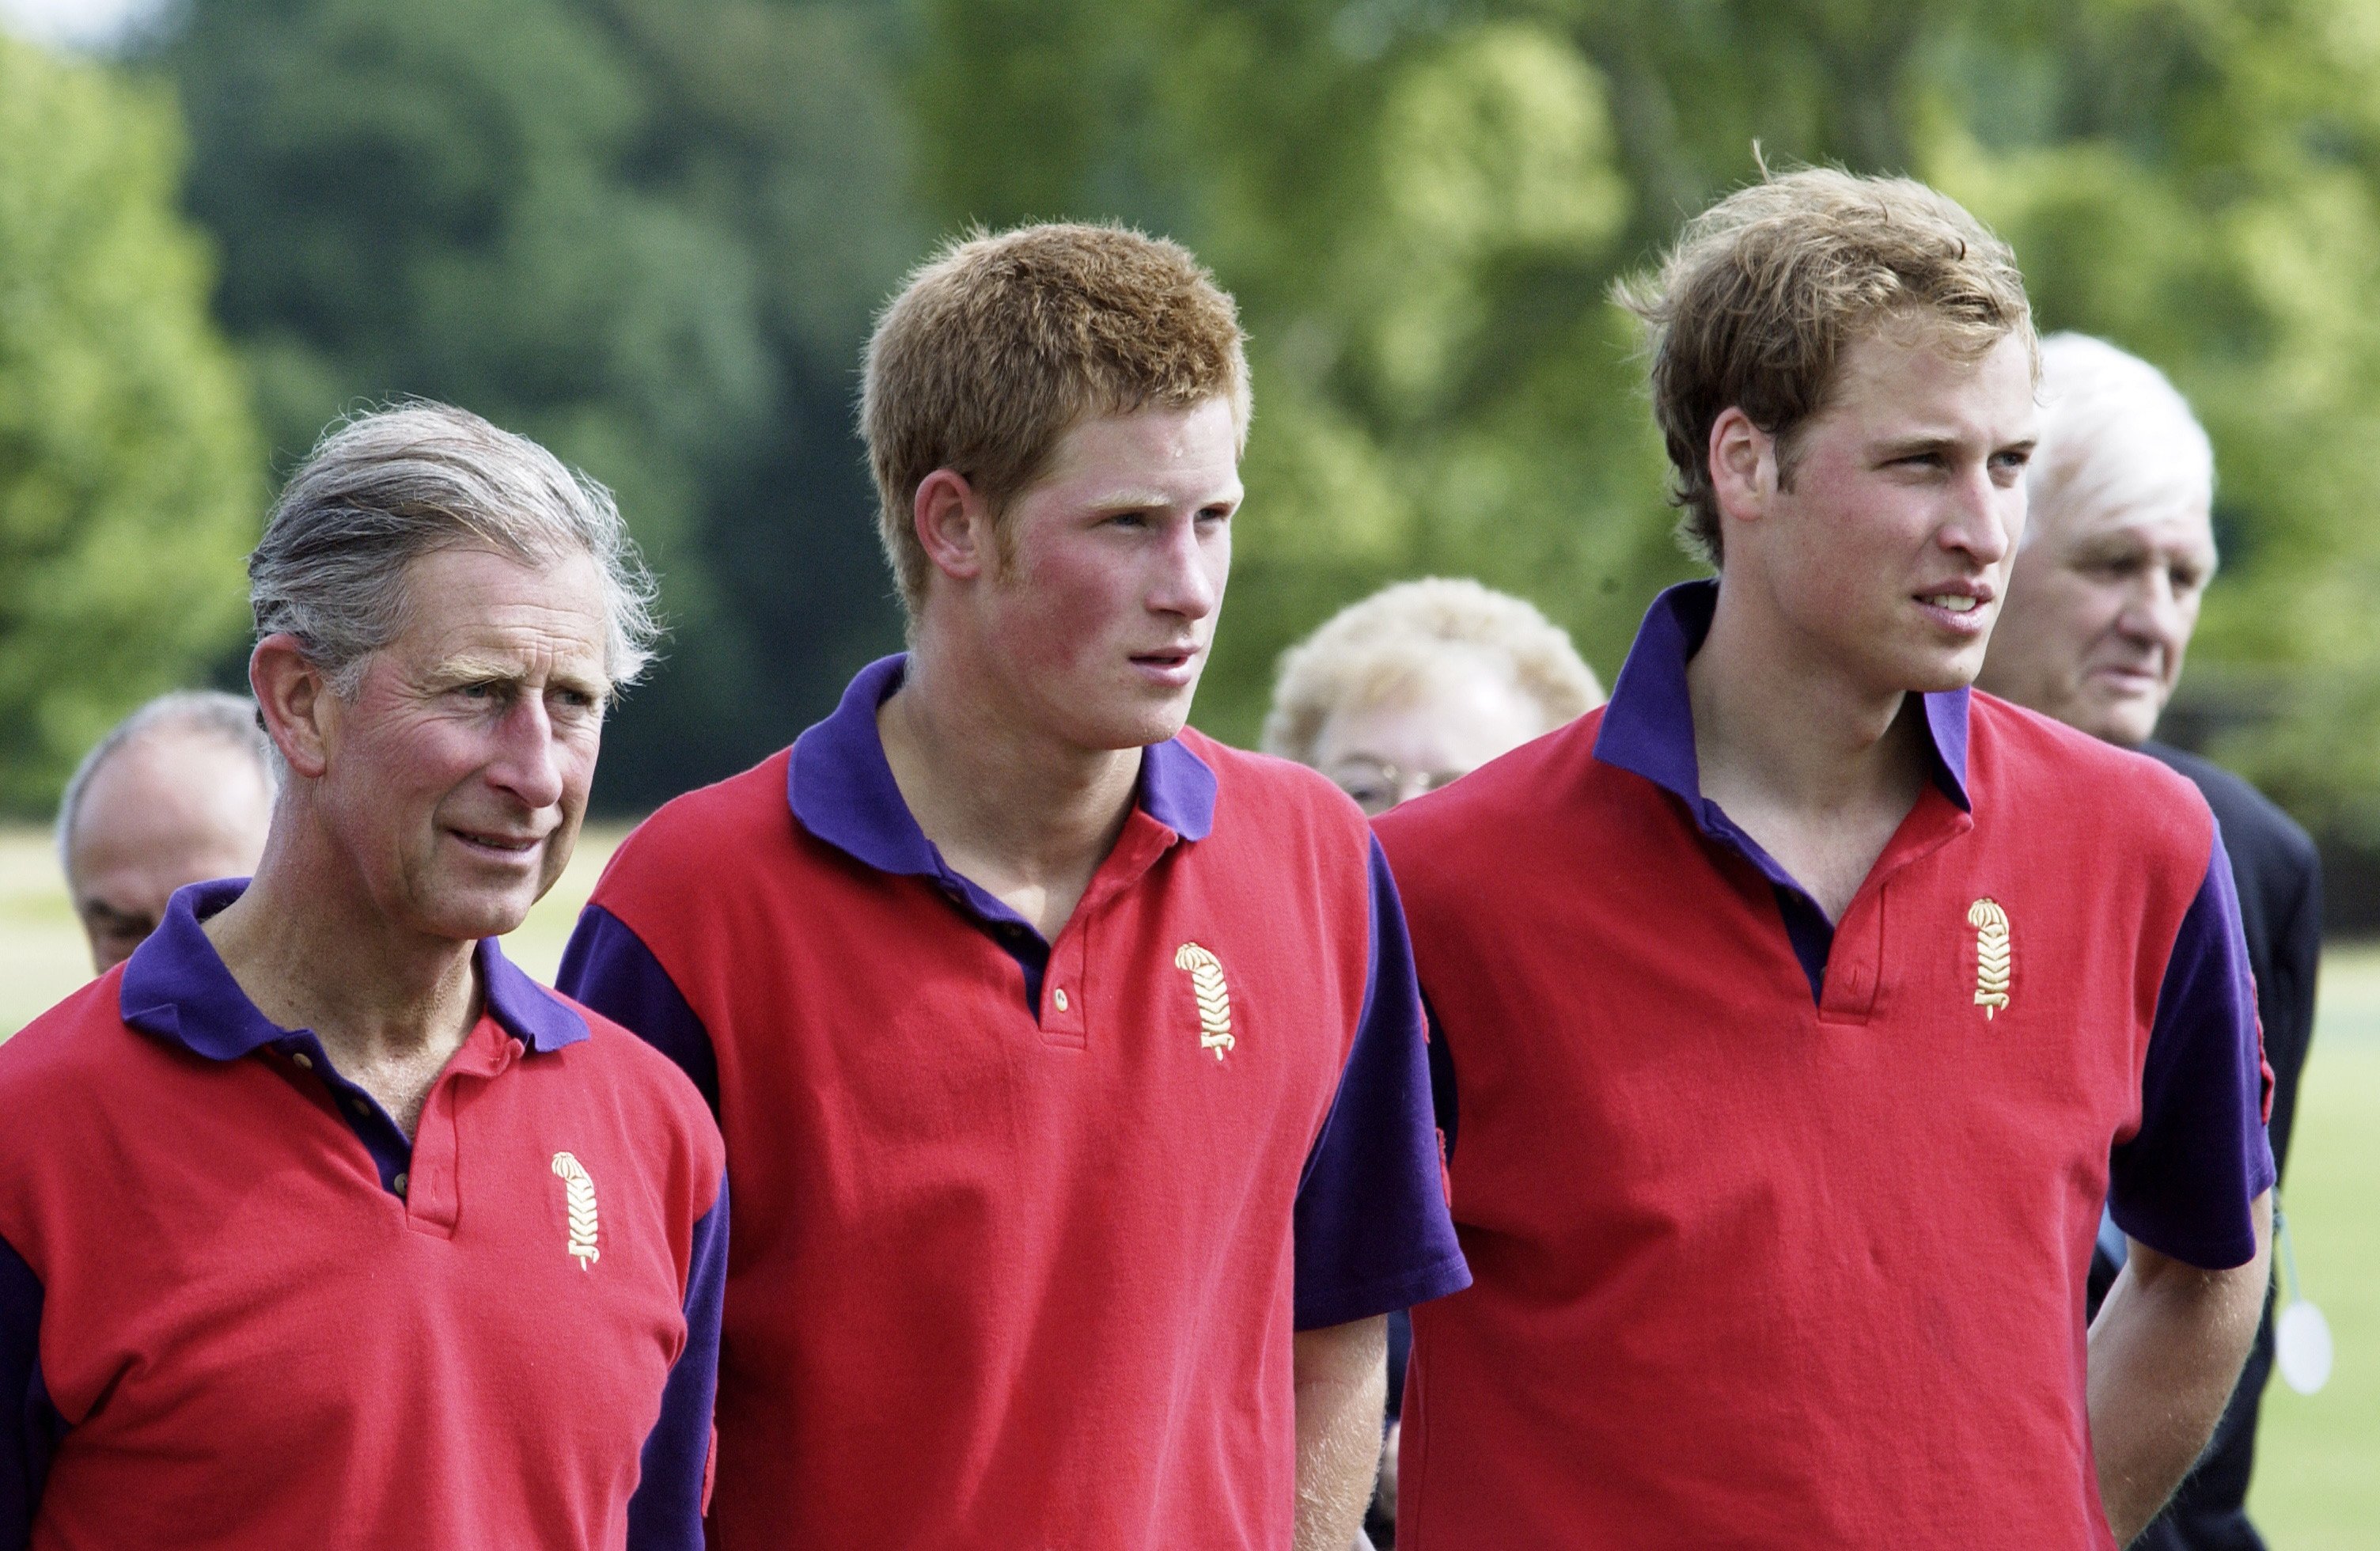 Prince Charles, Prince Harry, and Prince William at Cirencester Park Polo Club, in Cirencester, UK, on July 3, 2004 | Source: Getty Images